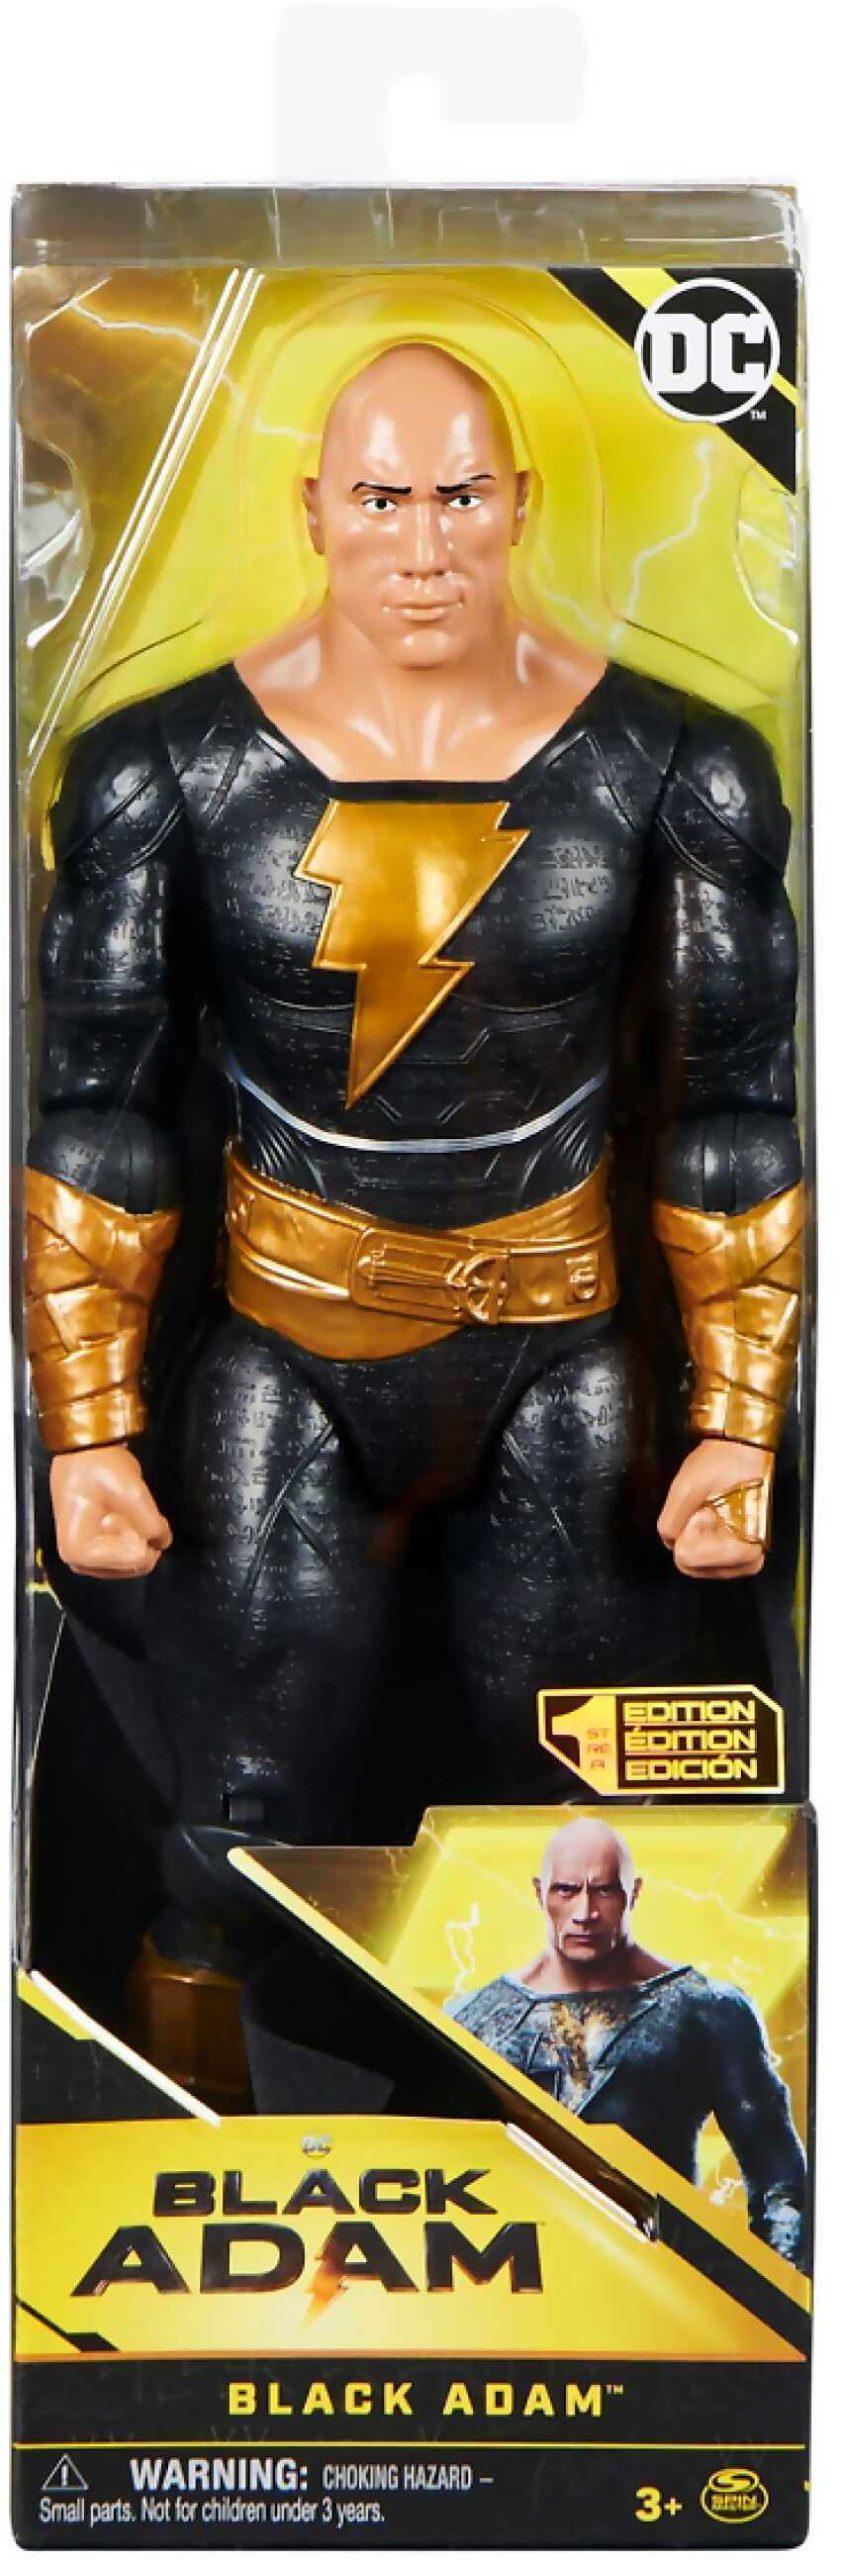 Dc - Dc Comics Black Adam Movie 12-inch Action Figure Collectible Kids Toys For Boys And Girls Ages 3 And Up